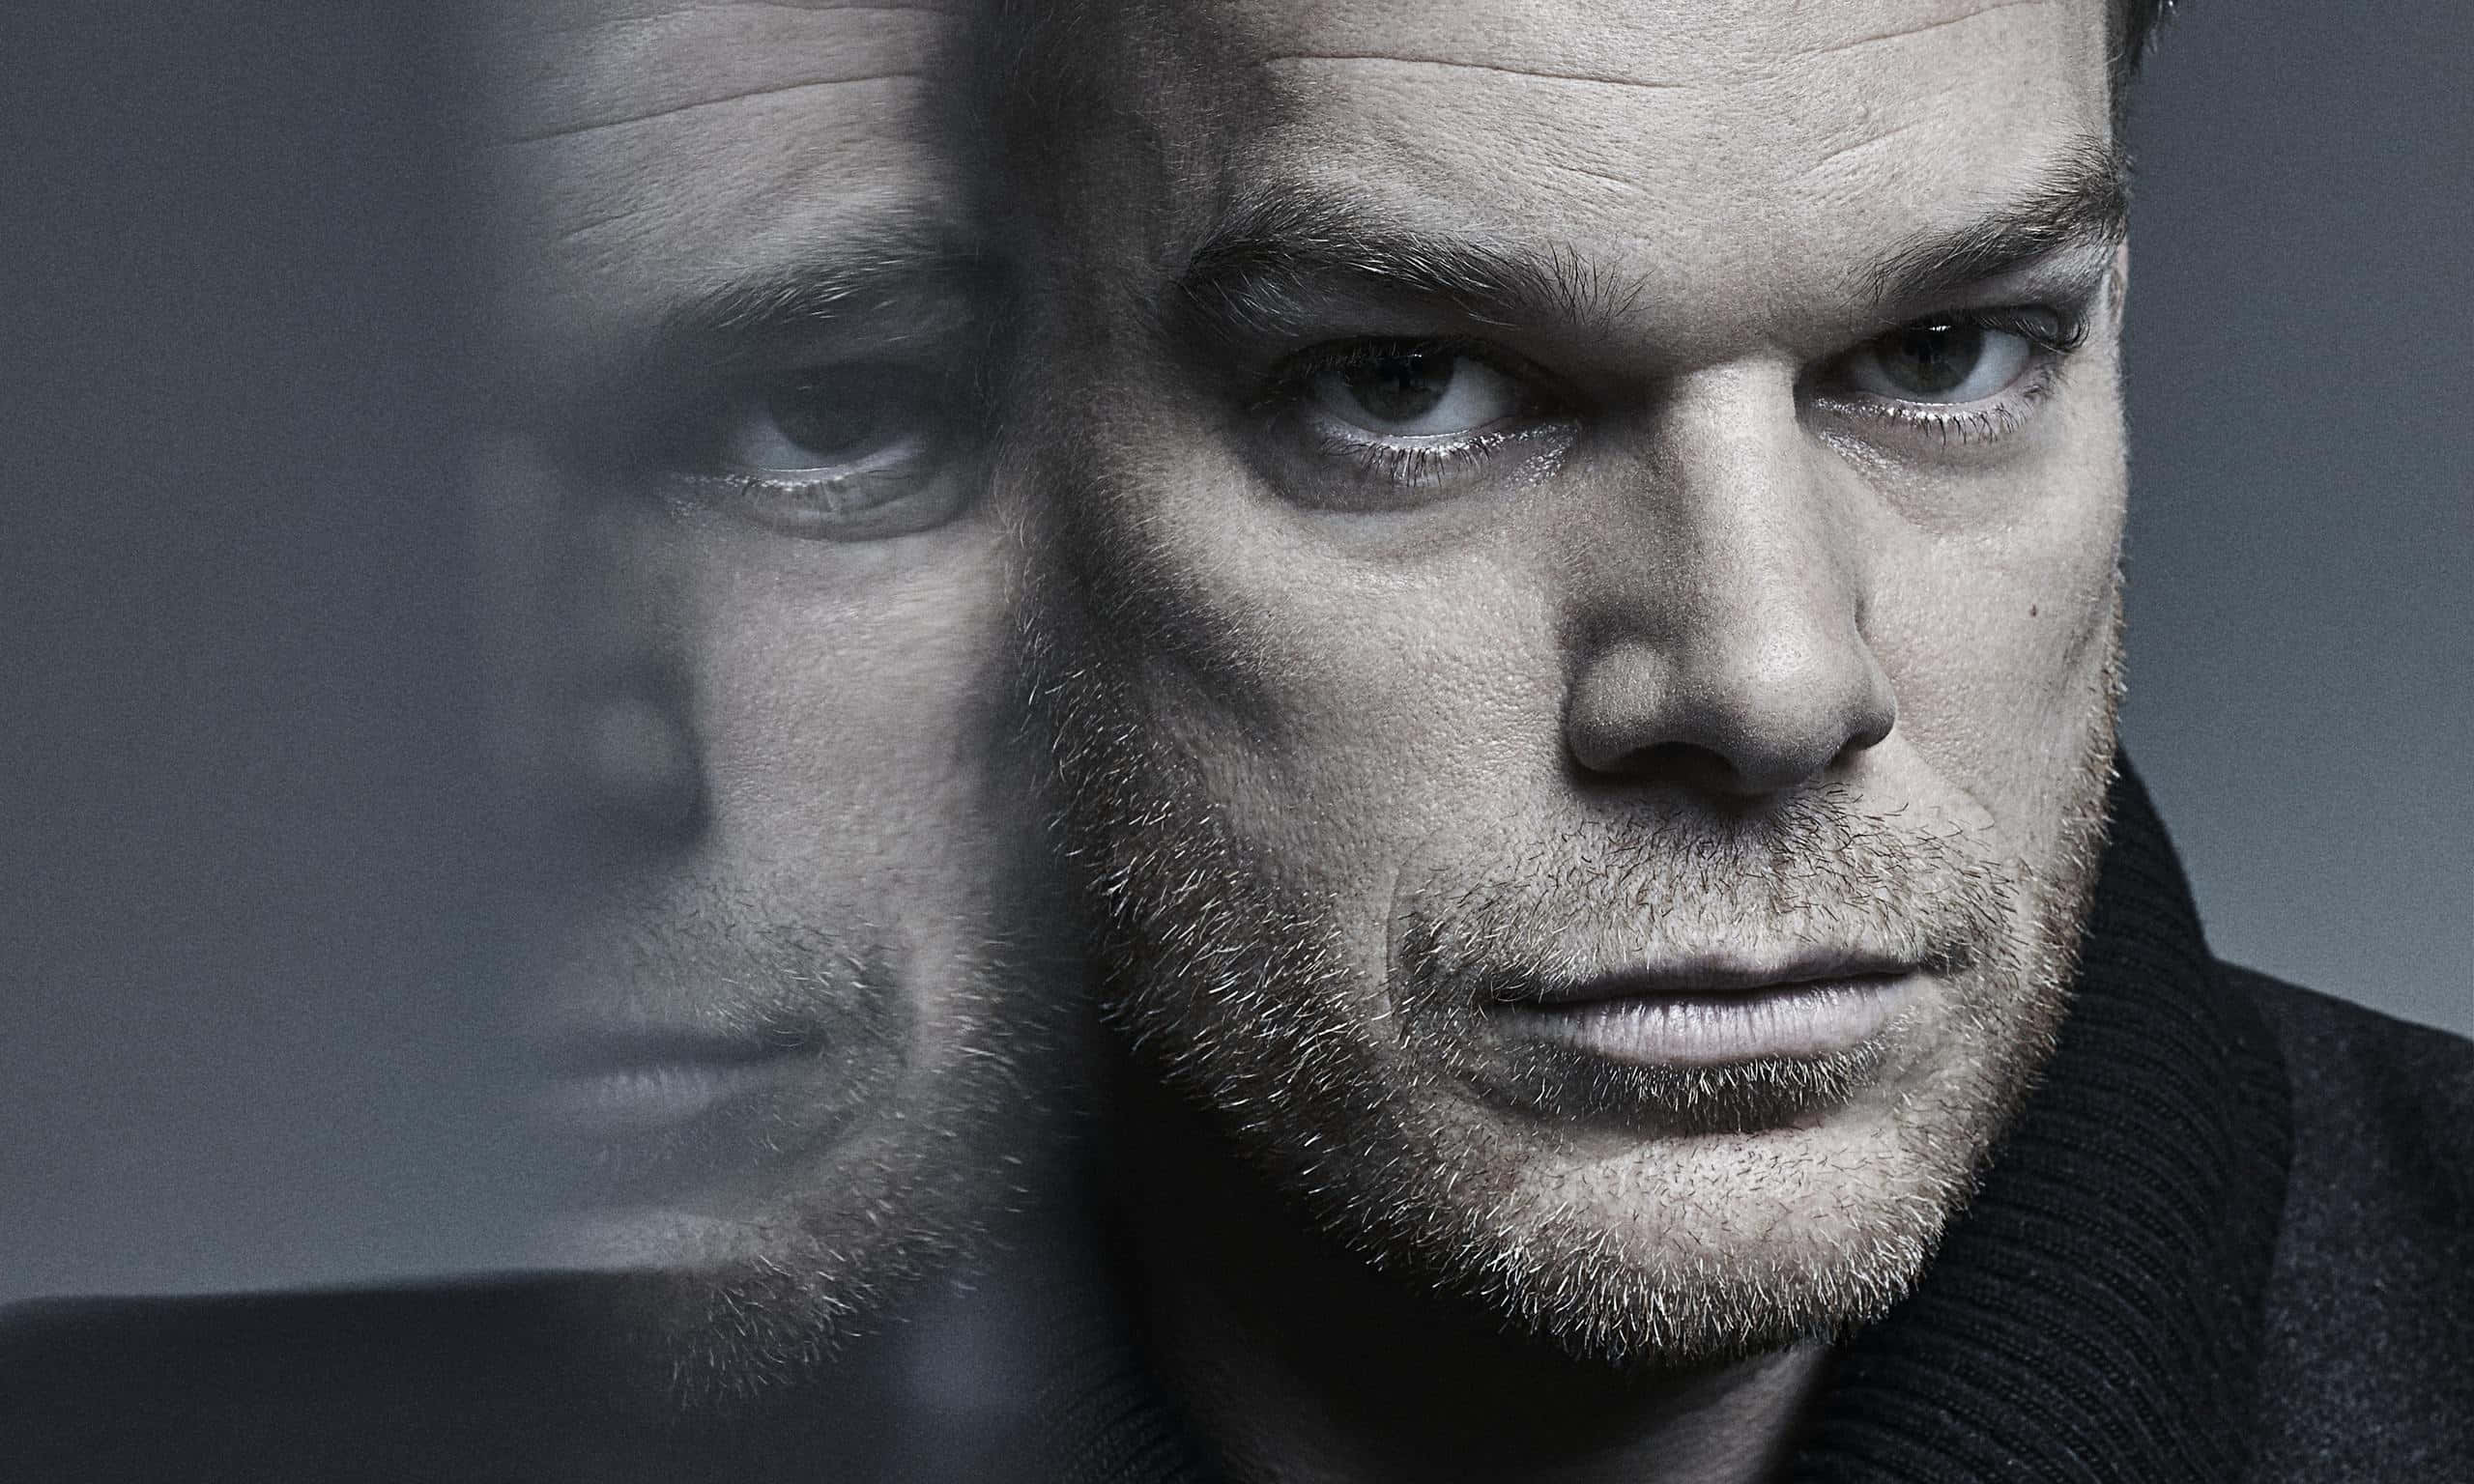 Michael C. Hall appearing in an ABC television promo Wallpaper